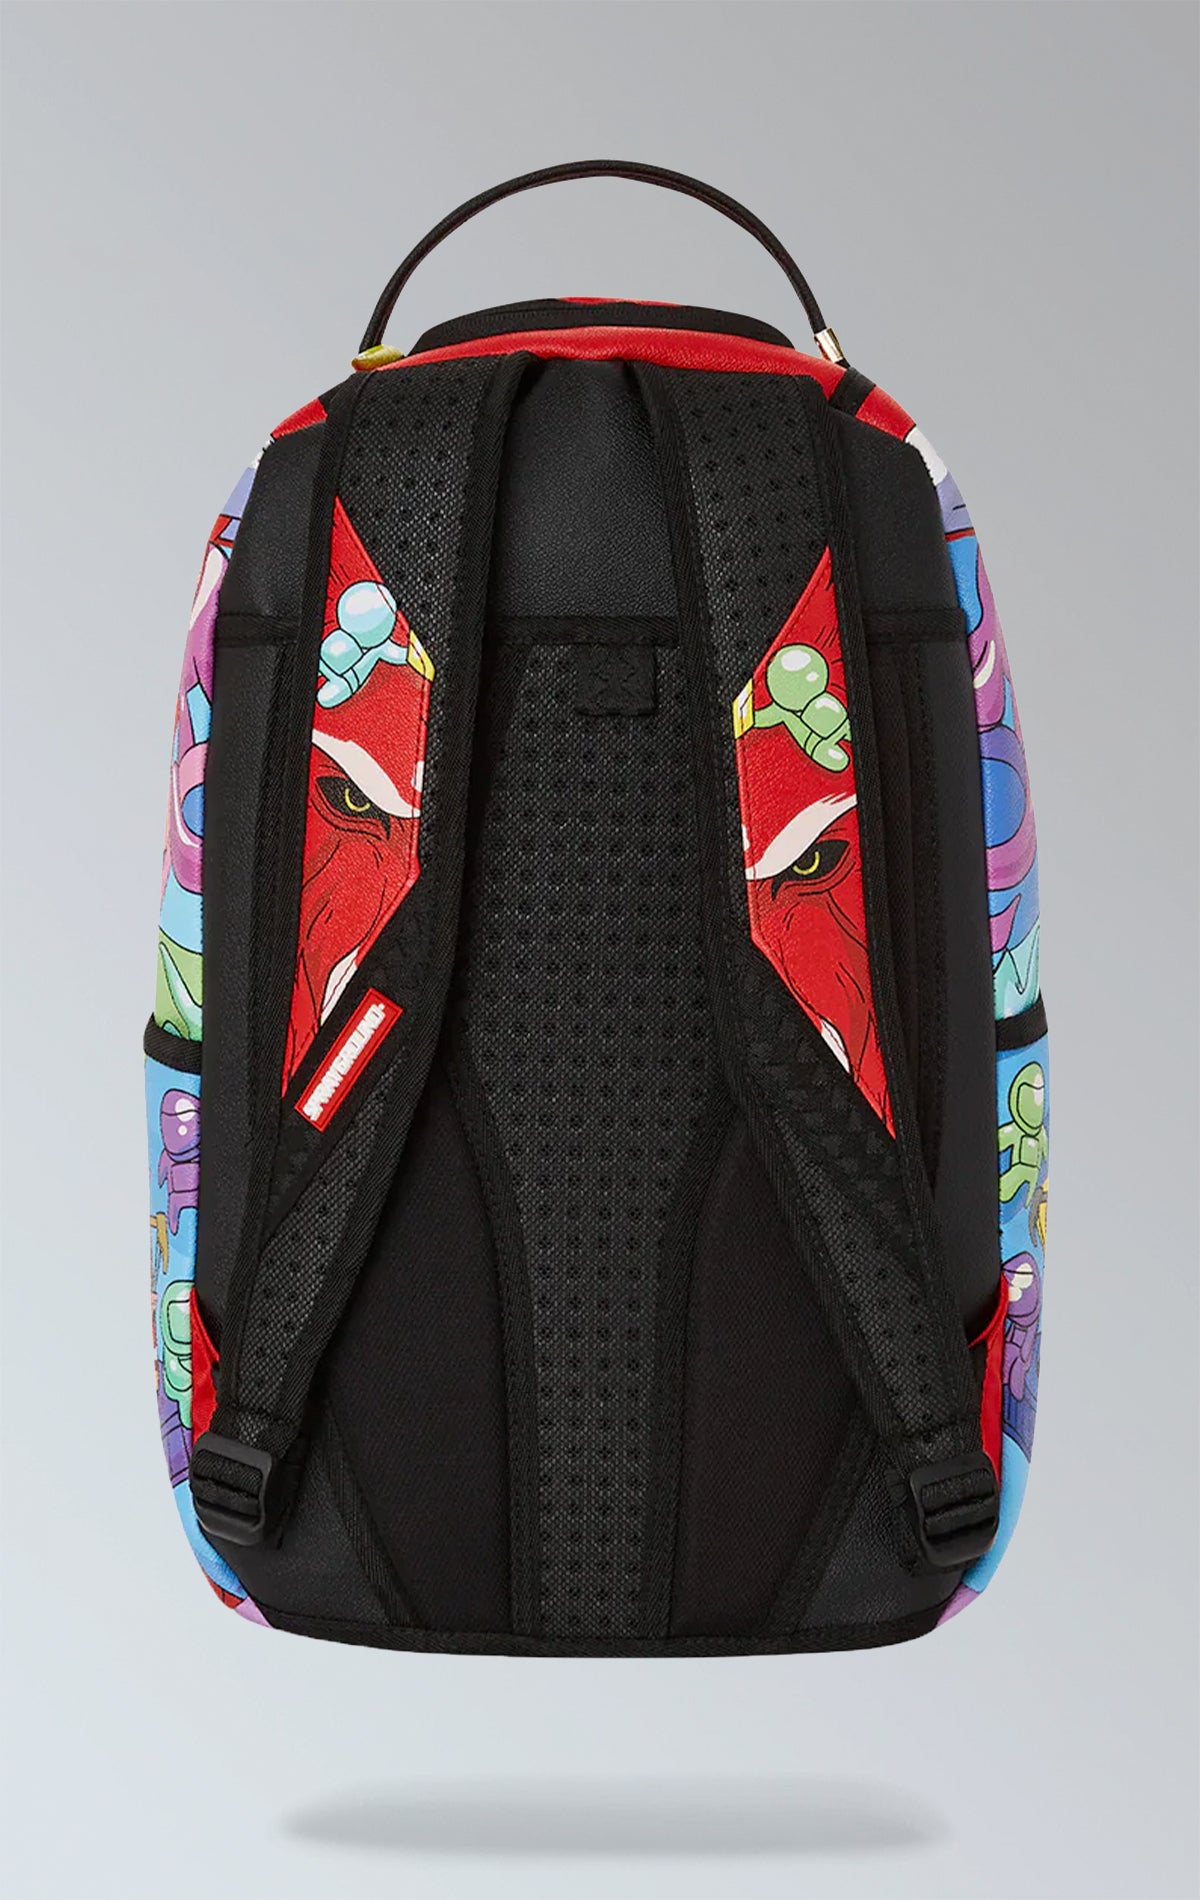 Sprayground, Astro King, backpack, vegan leather, space print, galaxy graphics, rocket ship logo, adjustable straps, padded back panel, sunglass pouch.